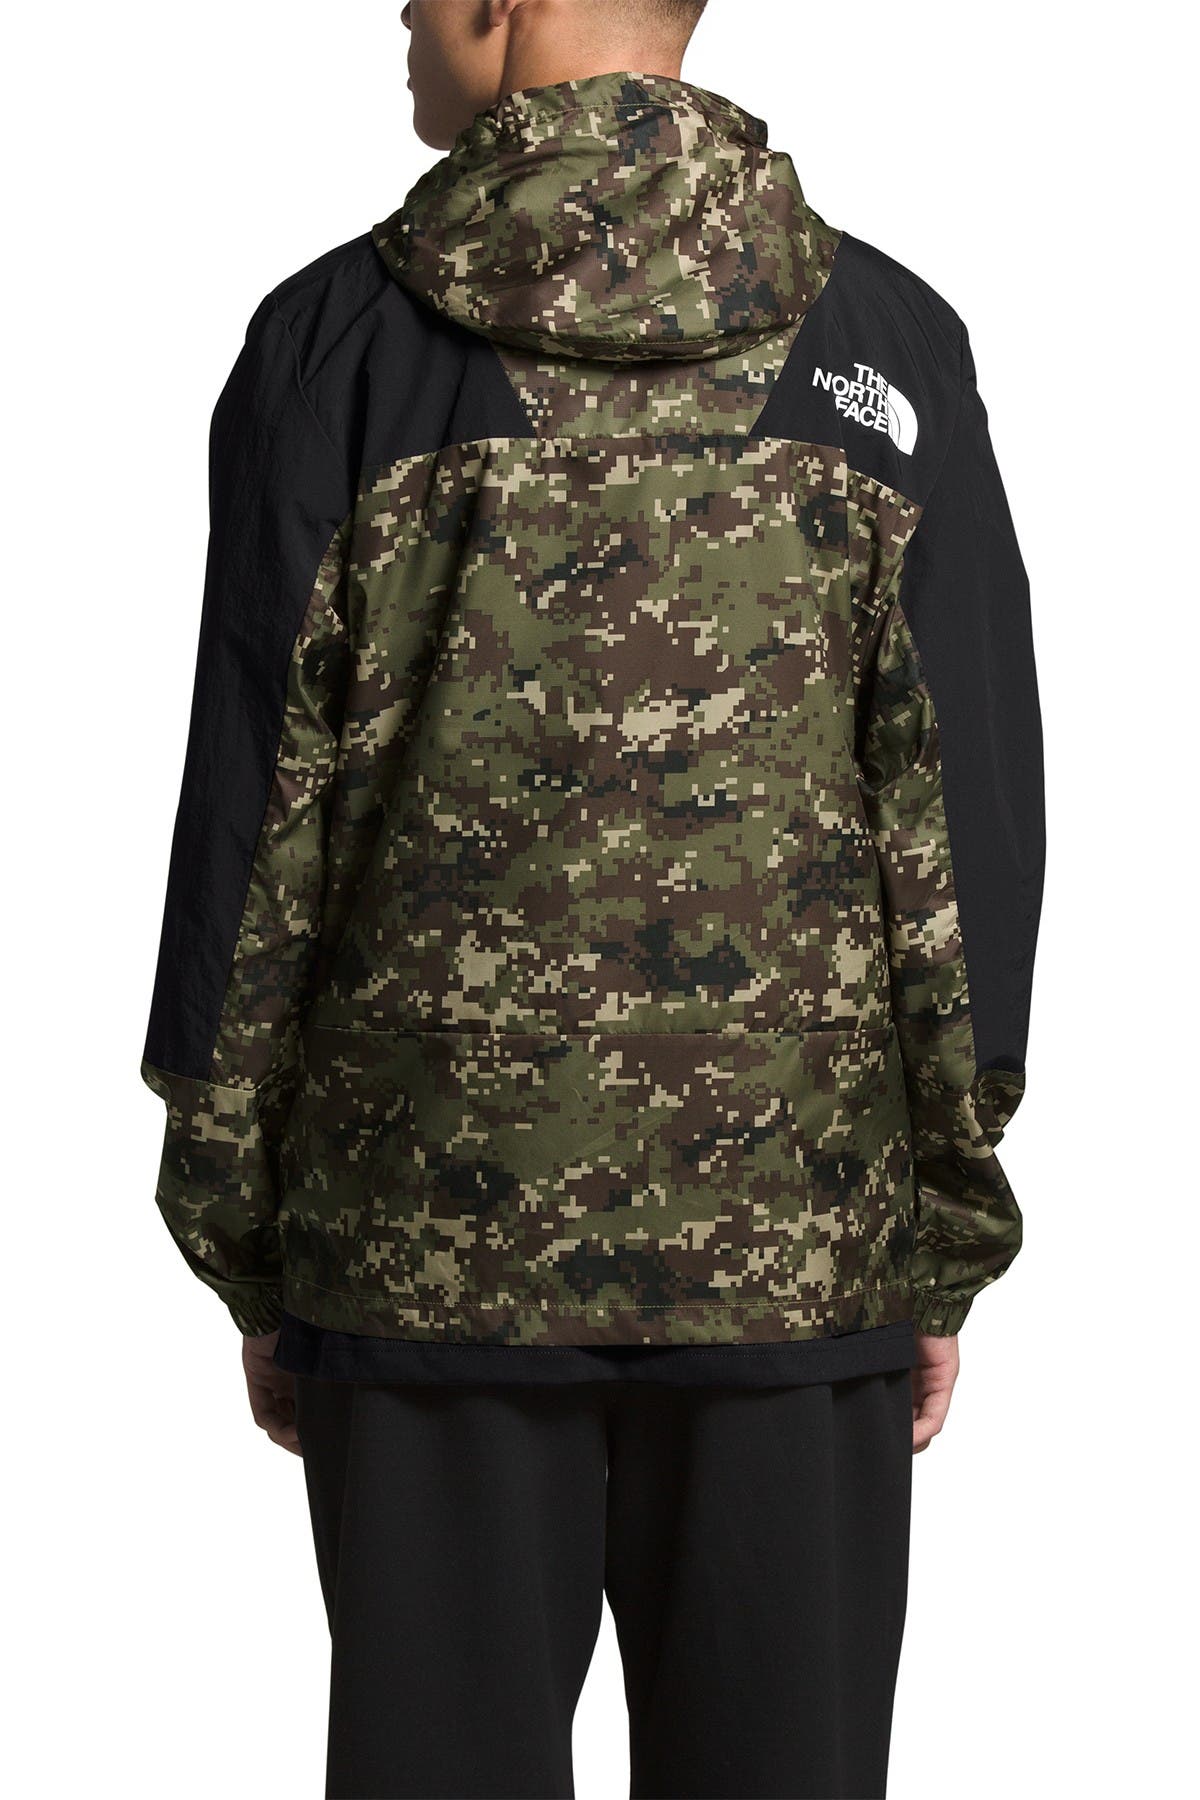 north face camo hoodie